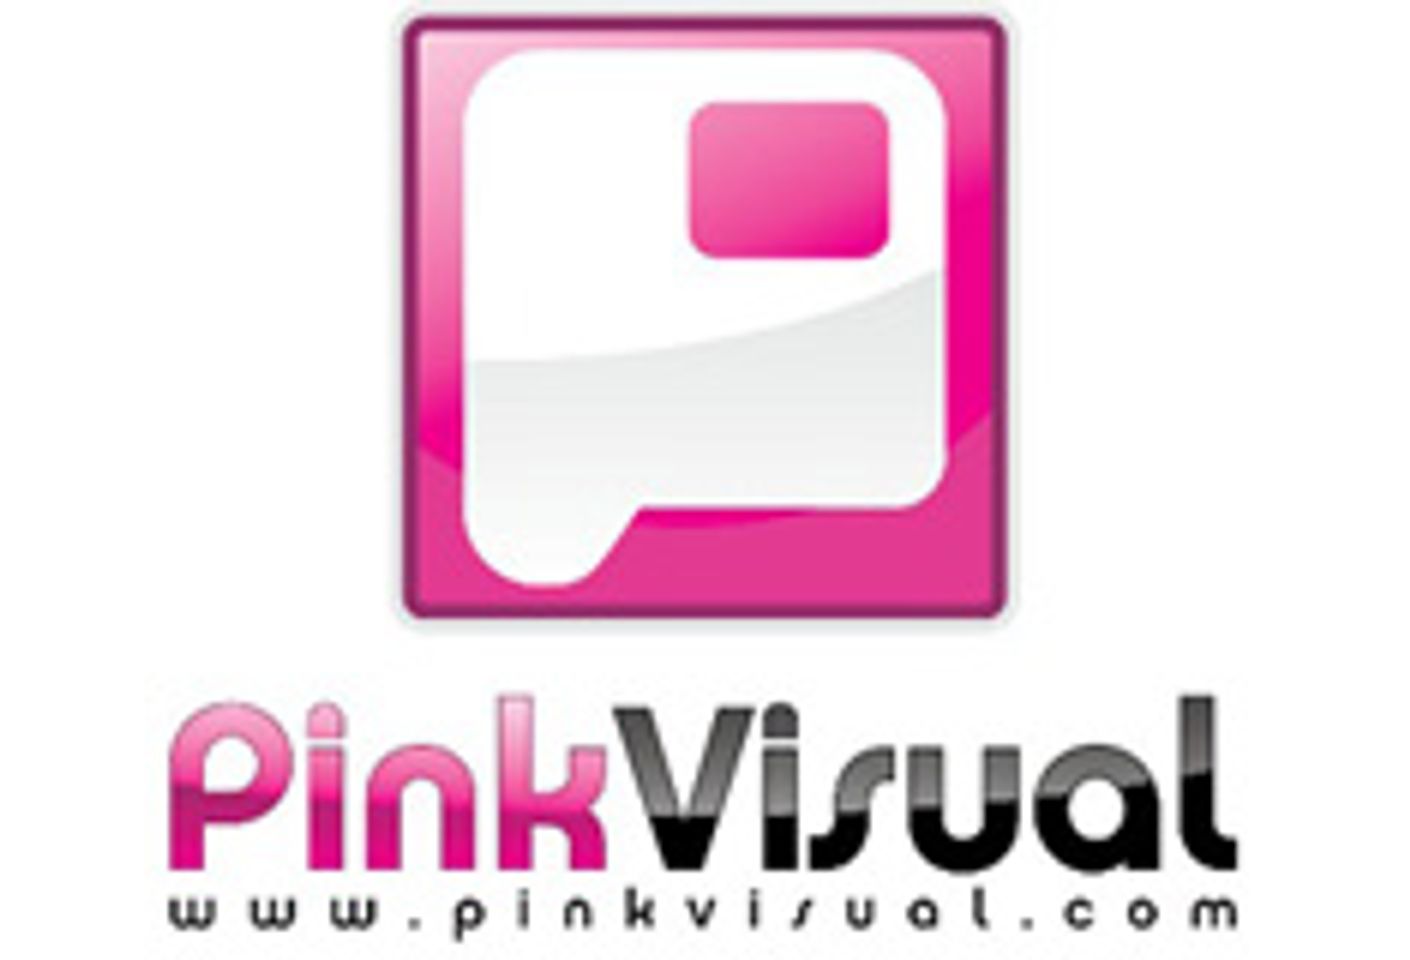 Porn Studio Pink Visual Ready for the iPad, Launches Prototype Site